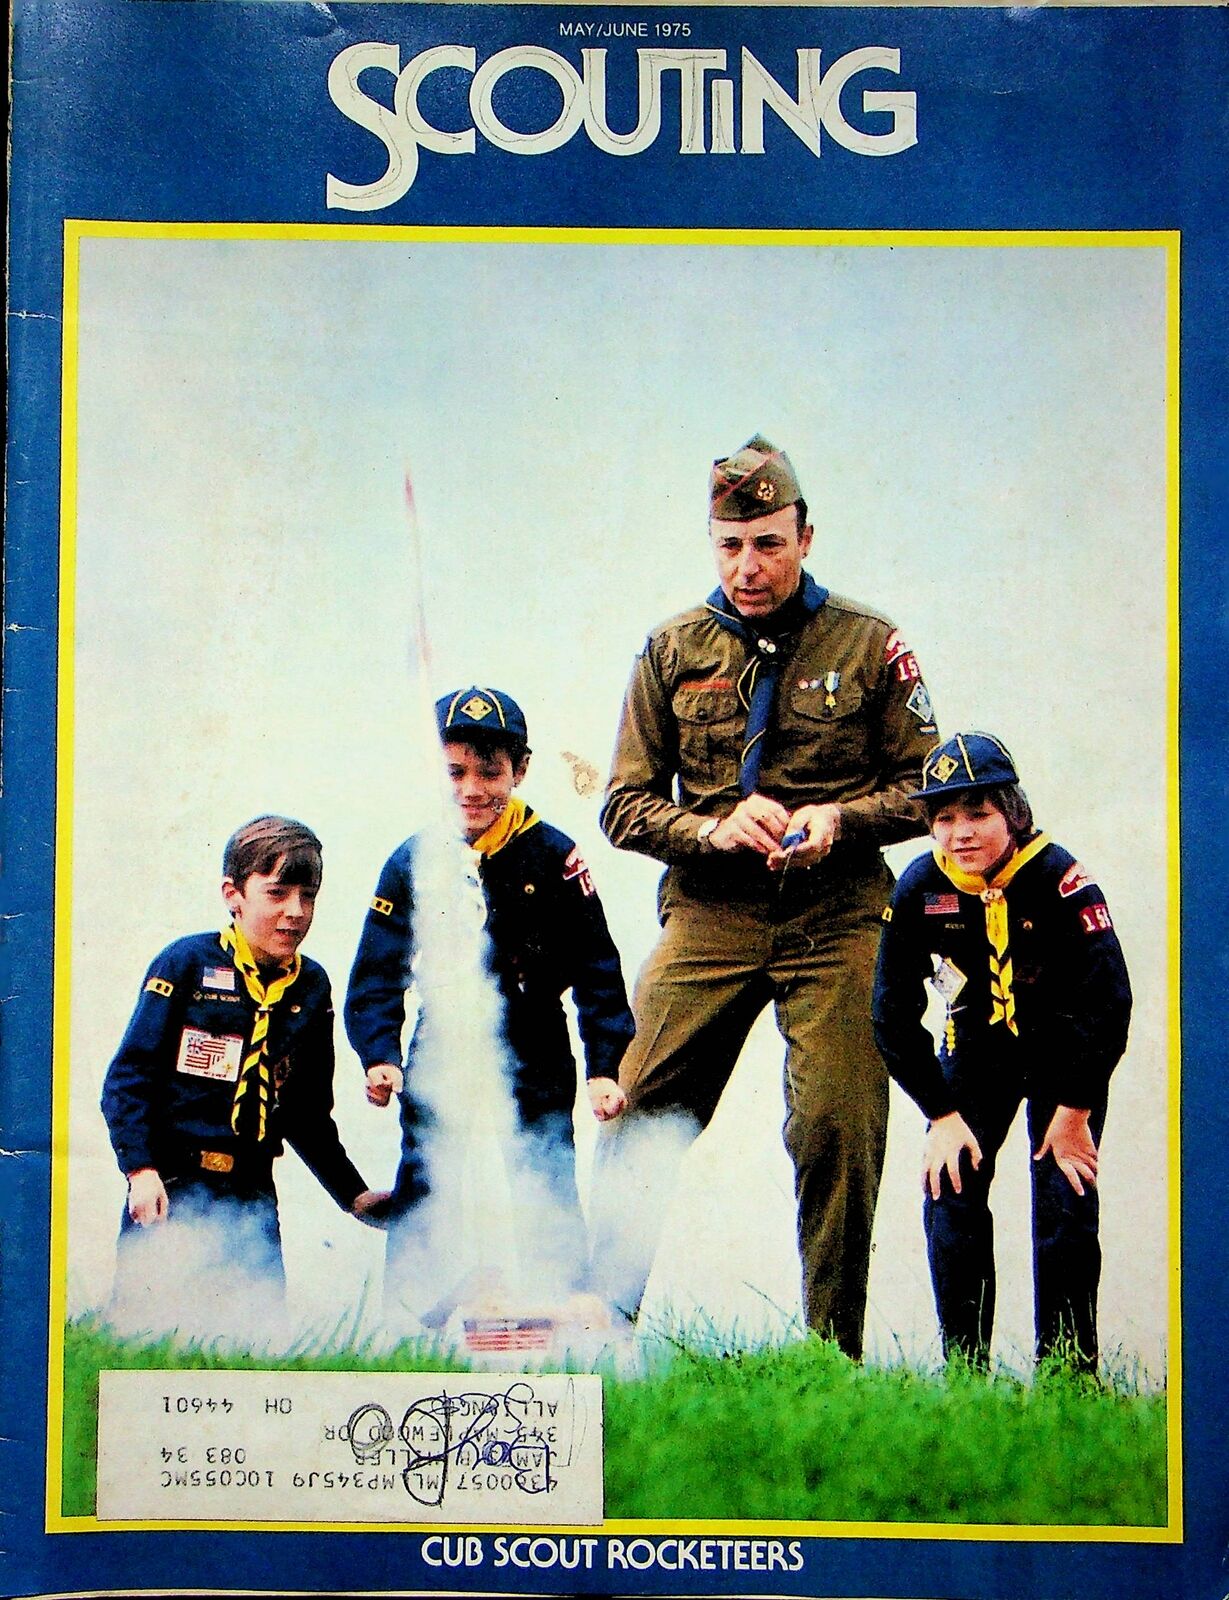 Boy Scouts of America Scouting Magazine 1975 May Jun Cub Scout Rocketeering Y